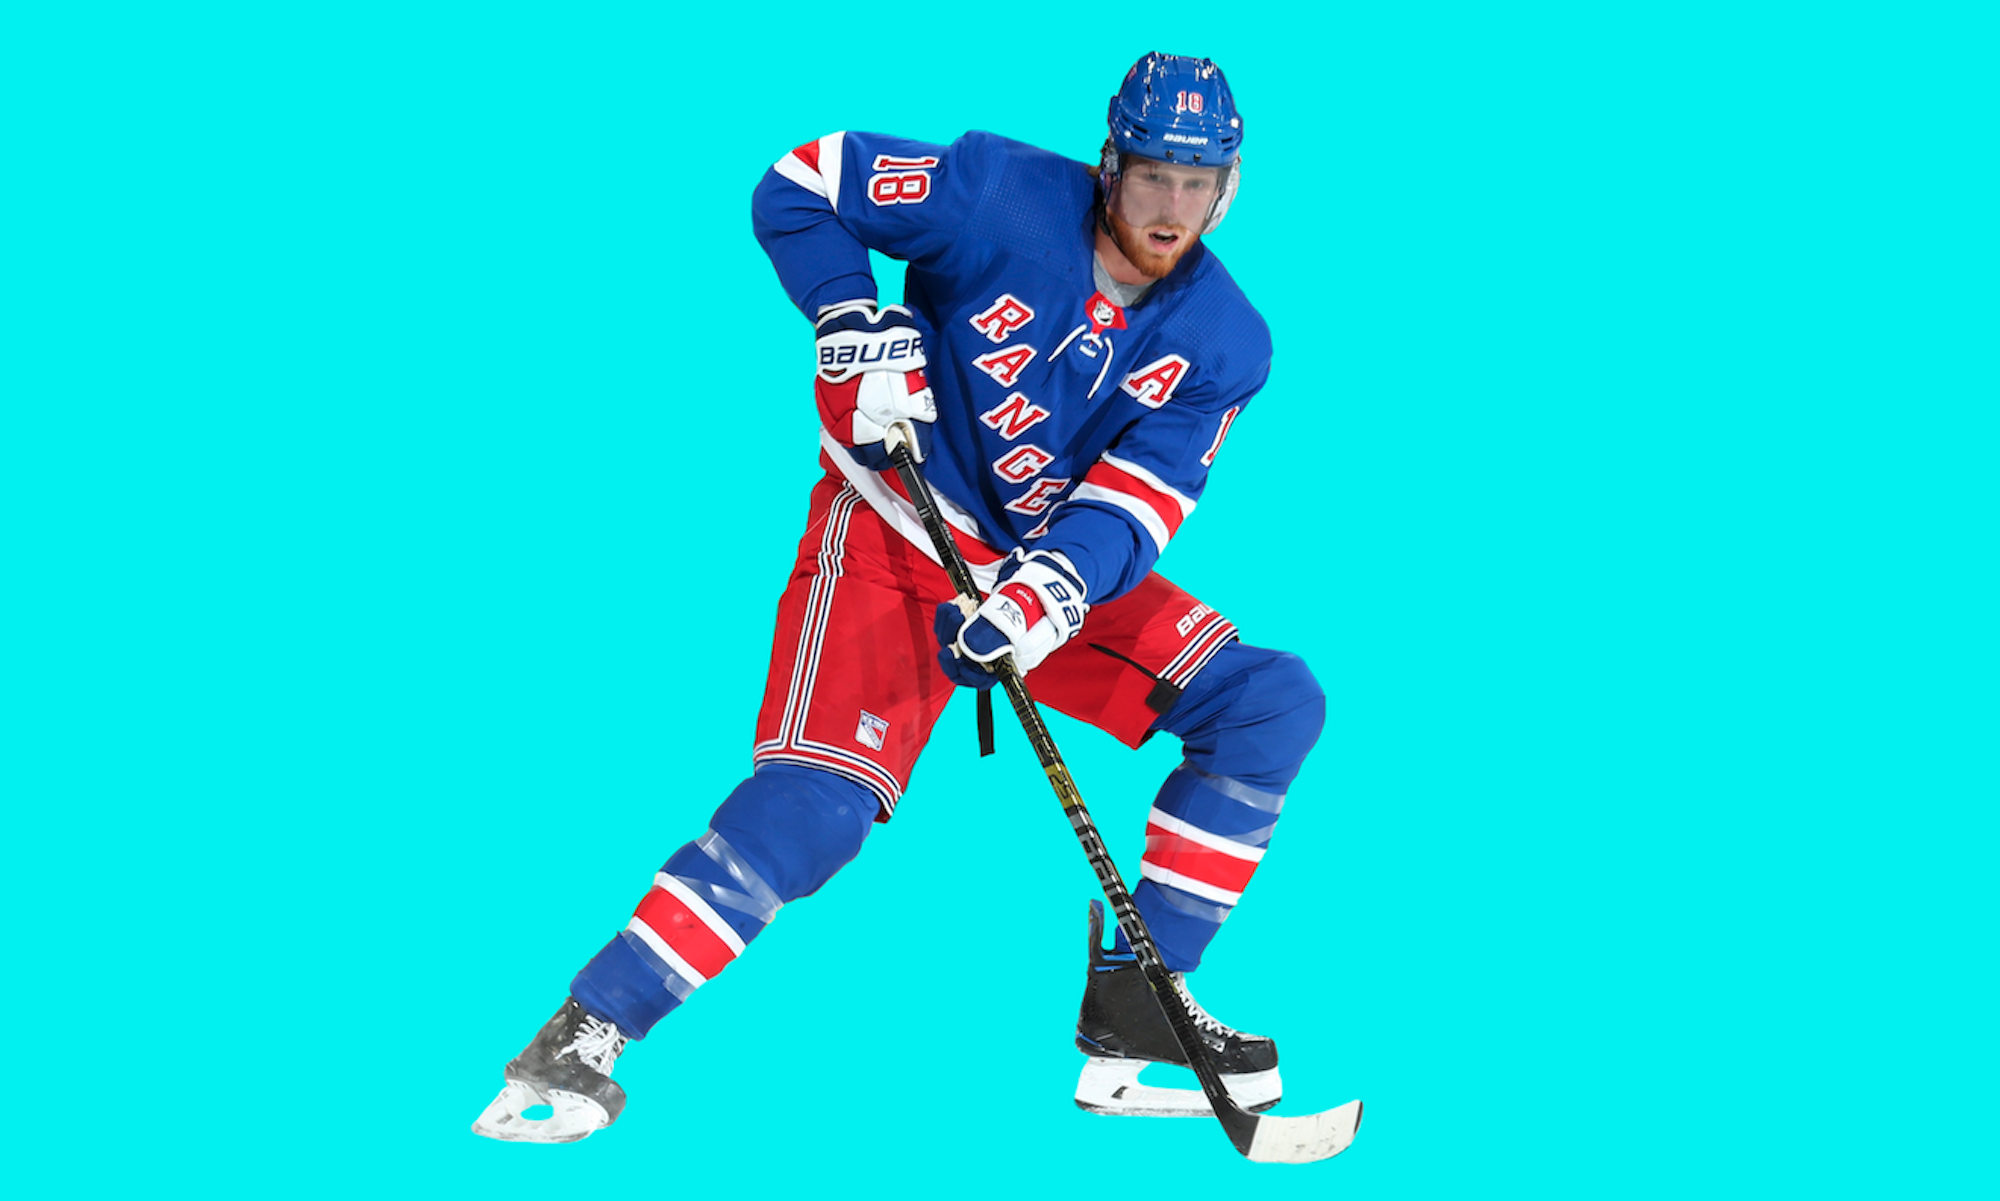 New York Rangers , Png Download - Sports Jersey, Transparent Png